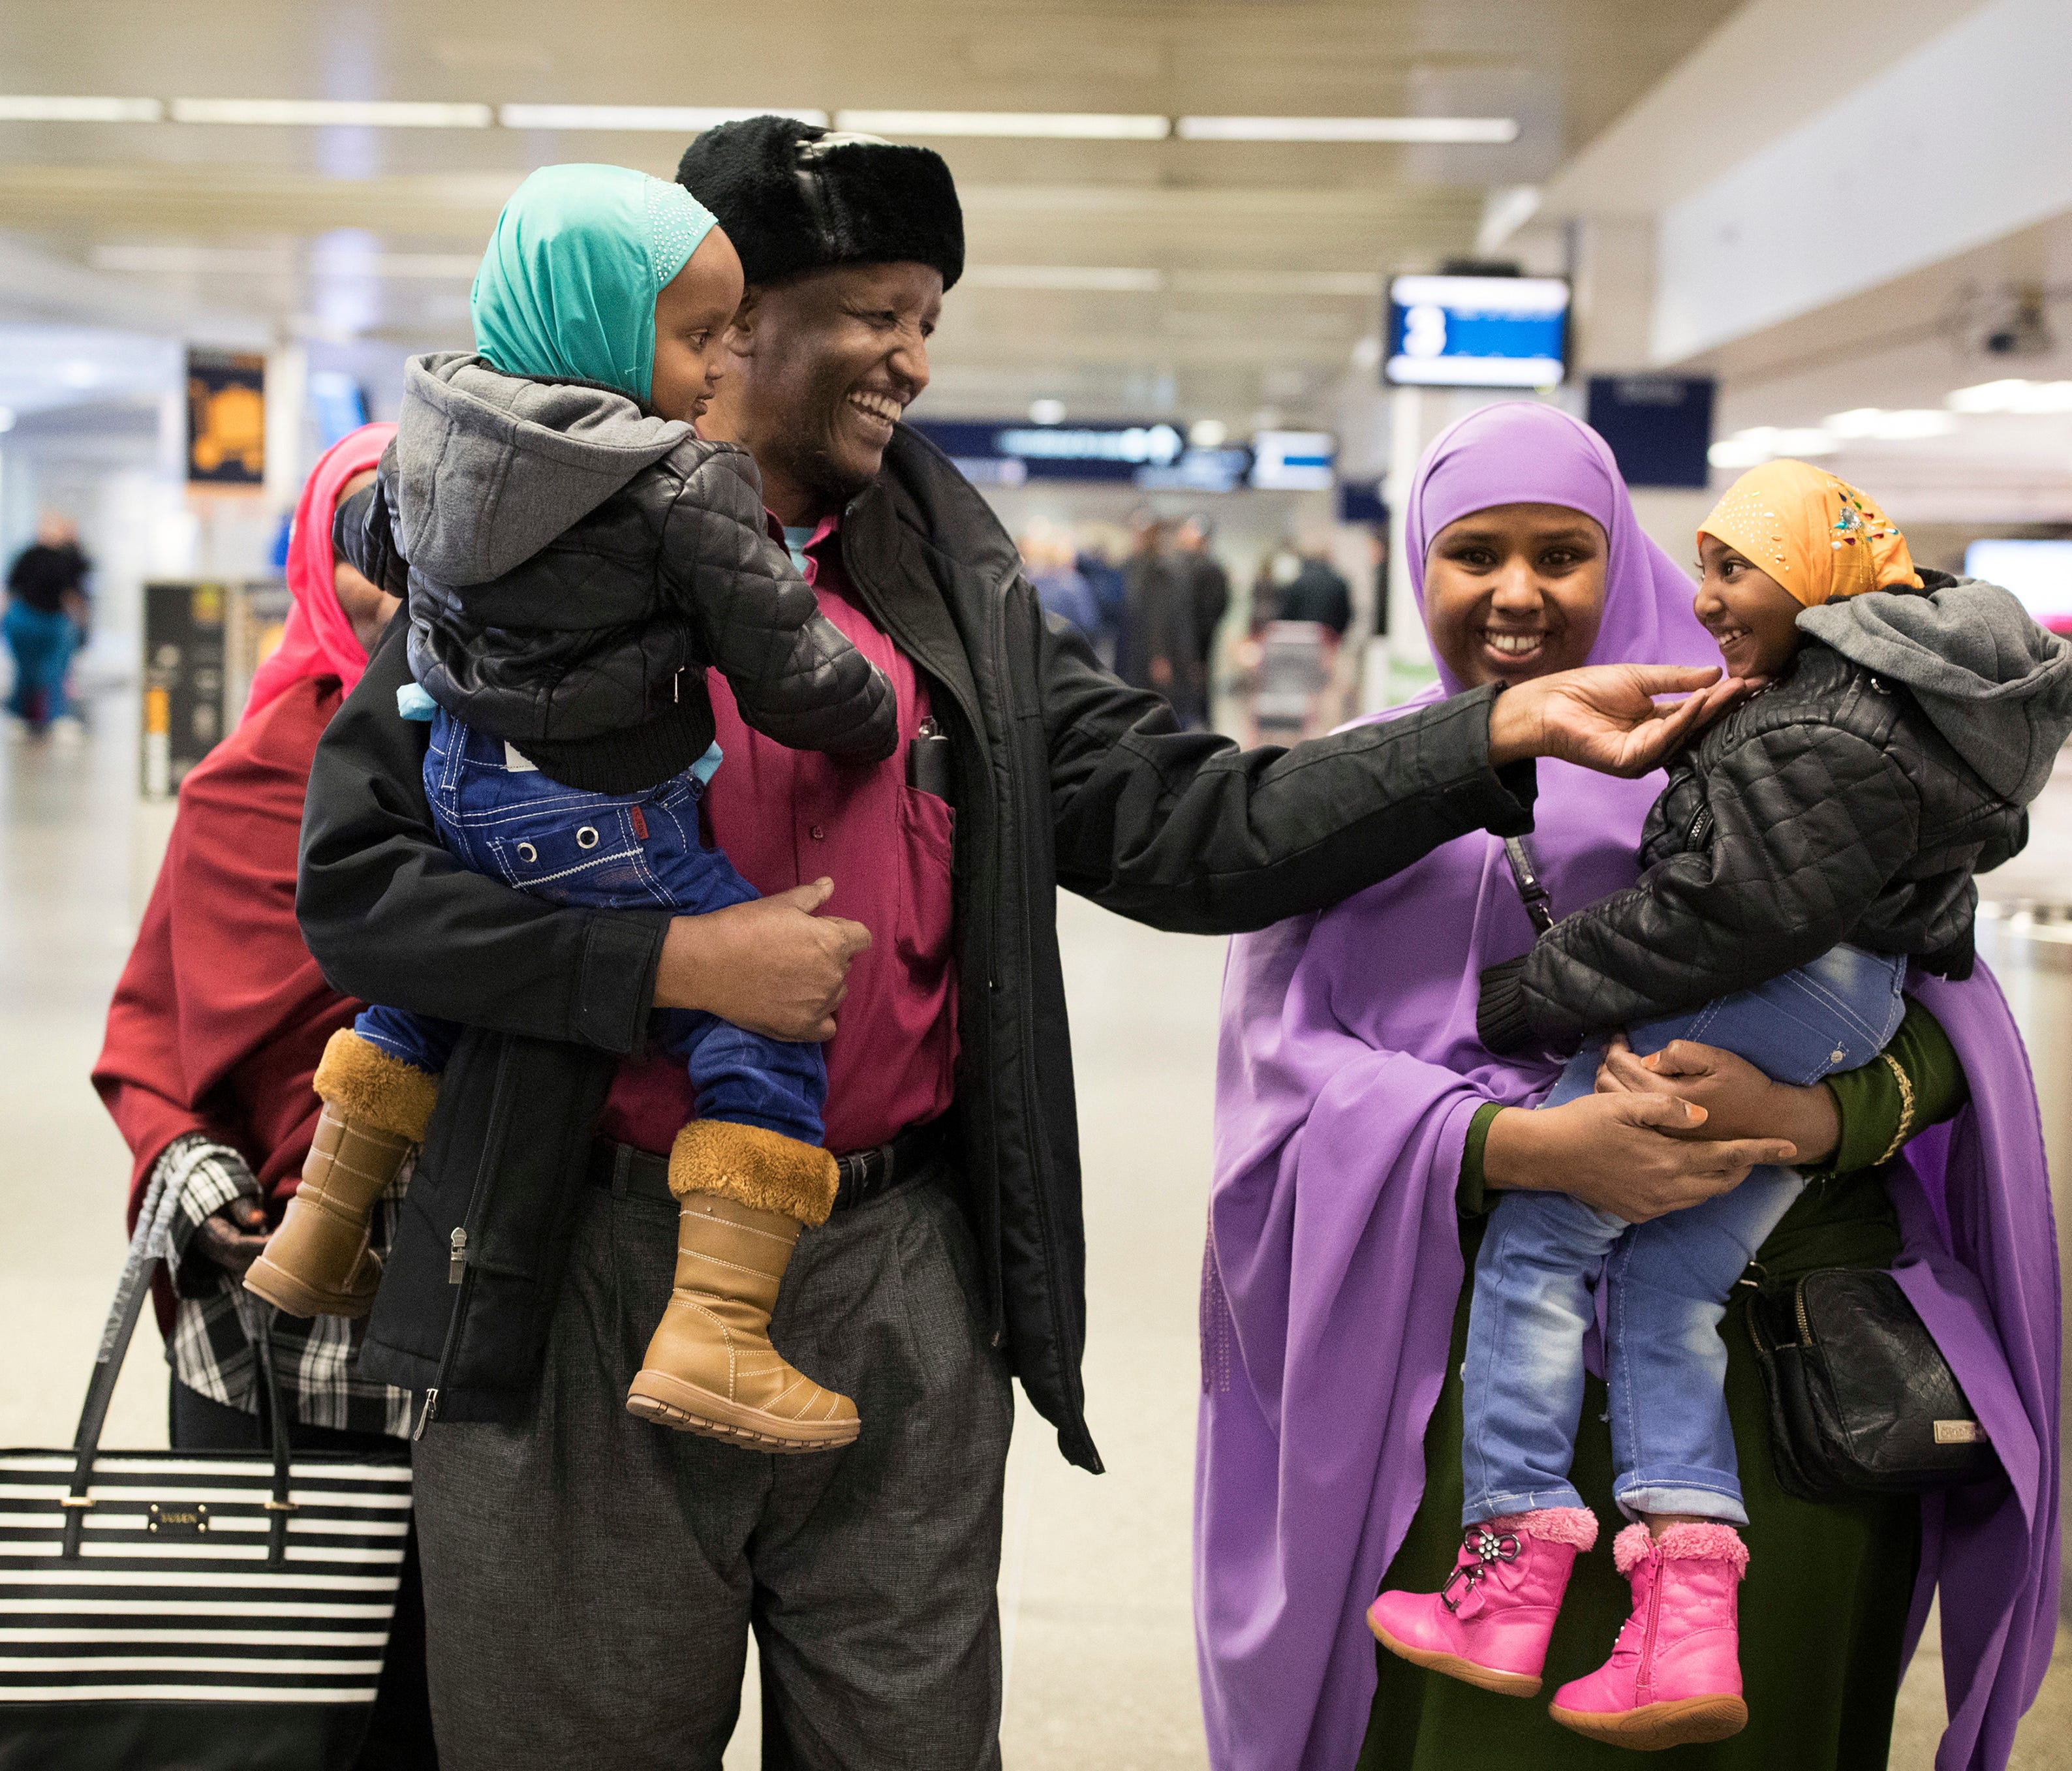 Mohamed lye, carrying his 2-year-old daughter, Nafiso, plays with his 4-year-old daughter, Nimo, carried by family friend Abdinasir Abdulahi, at Minneapolis–Saint Paul International Airport near Bloomington, Minn., after arriving from Amsterdam on  F